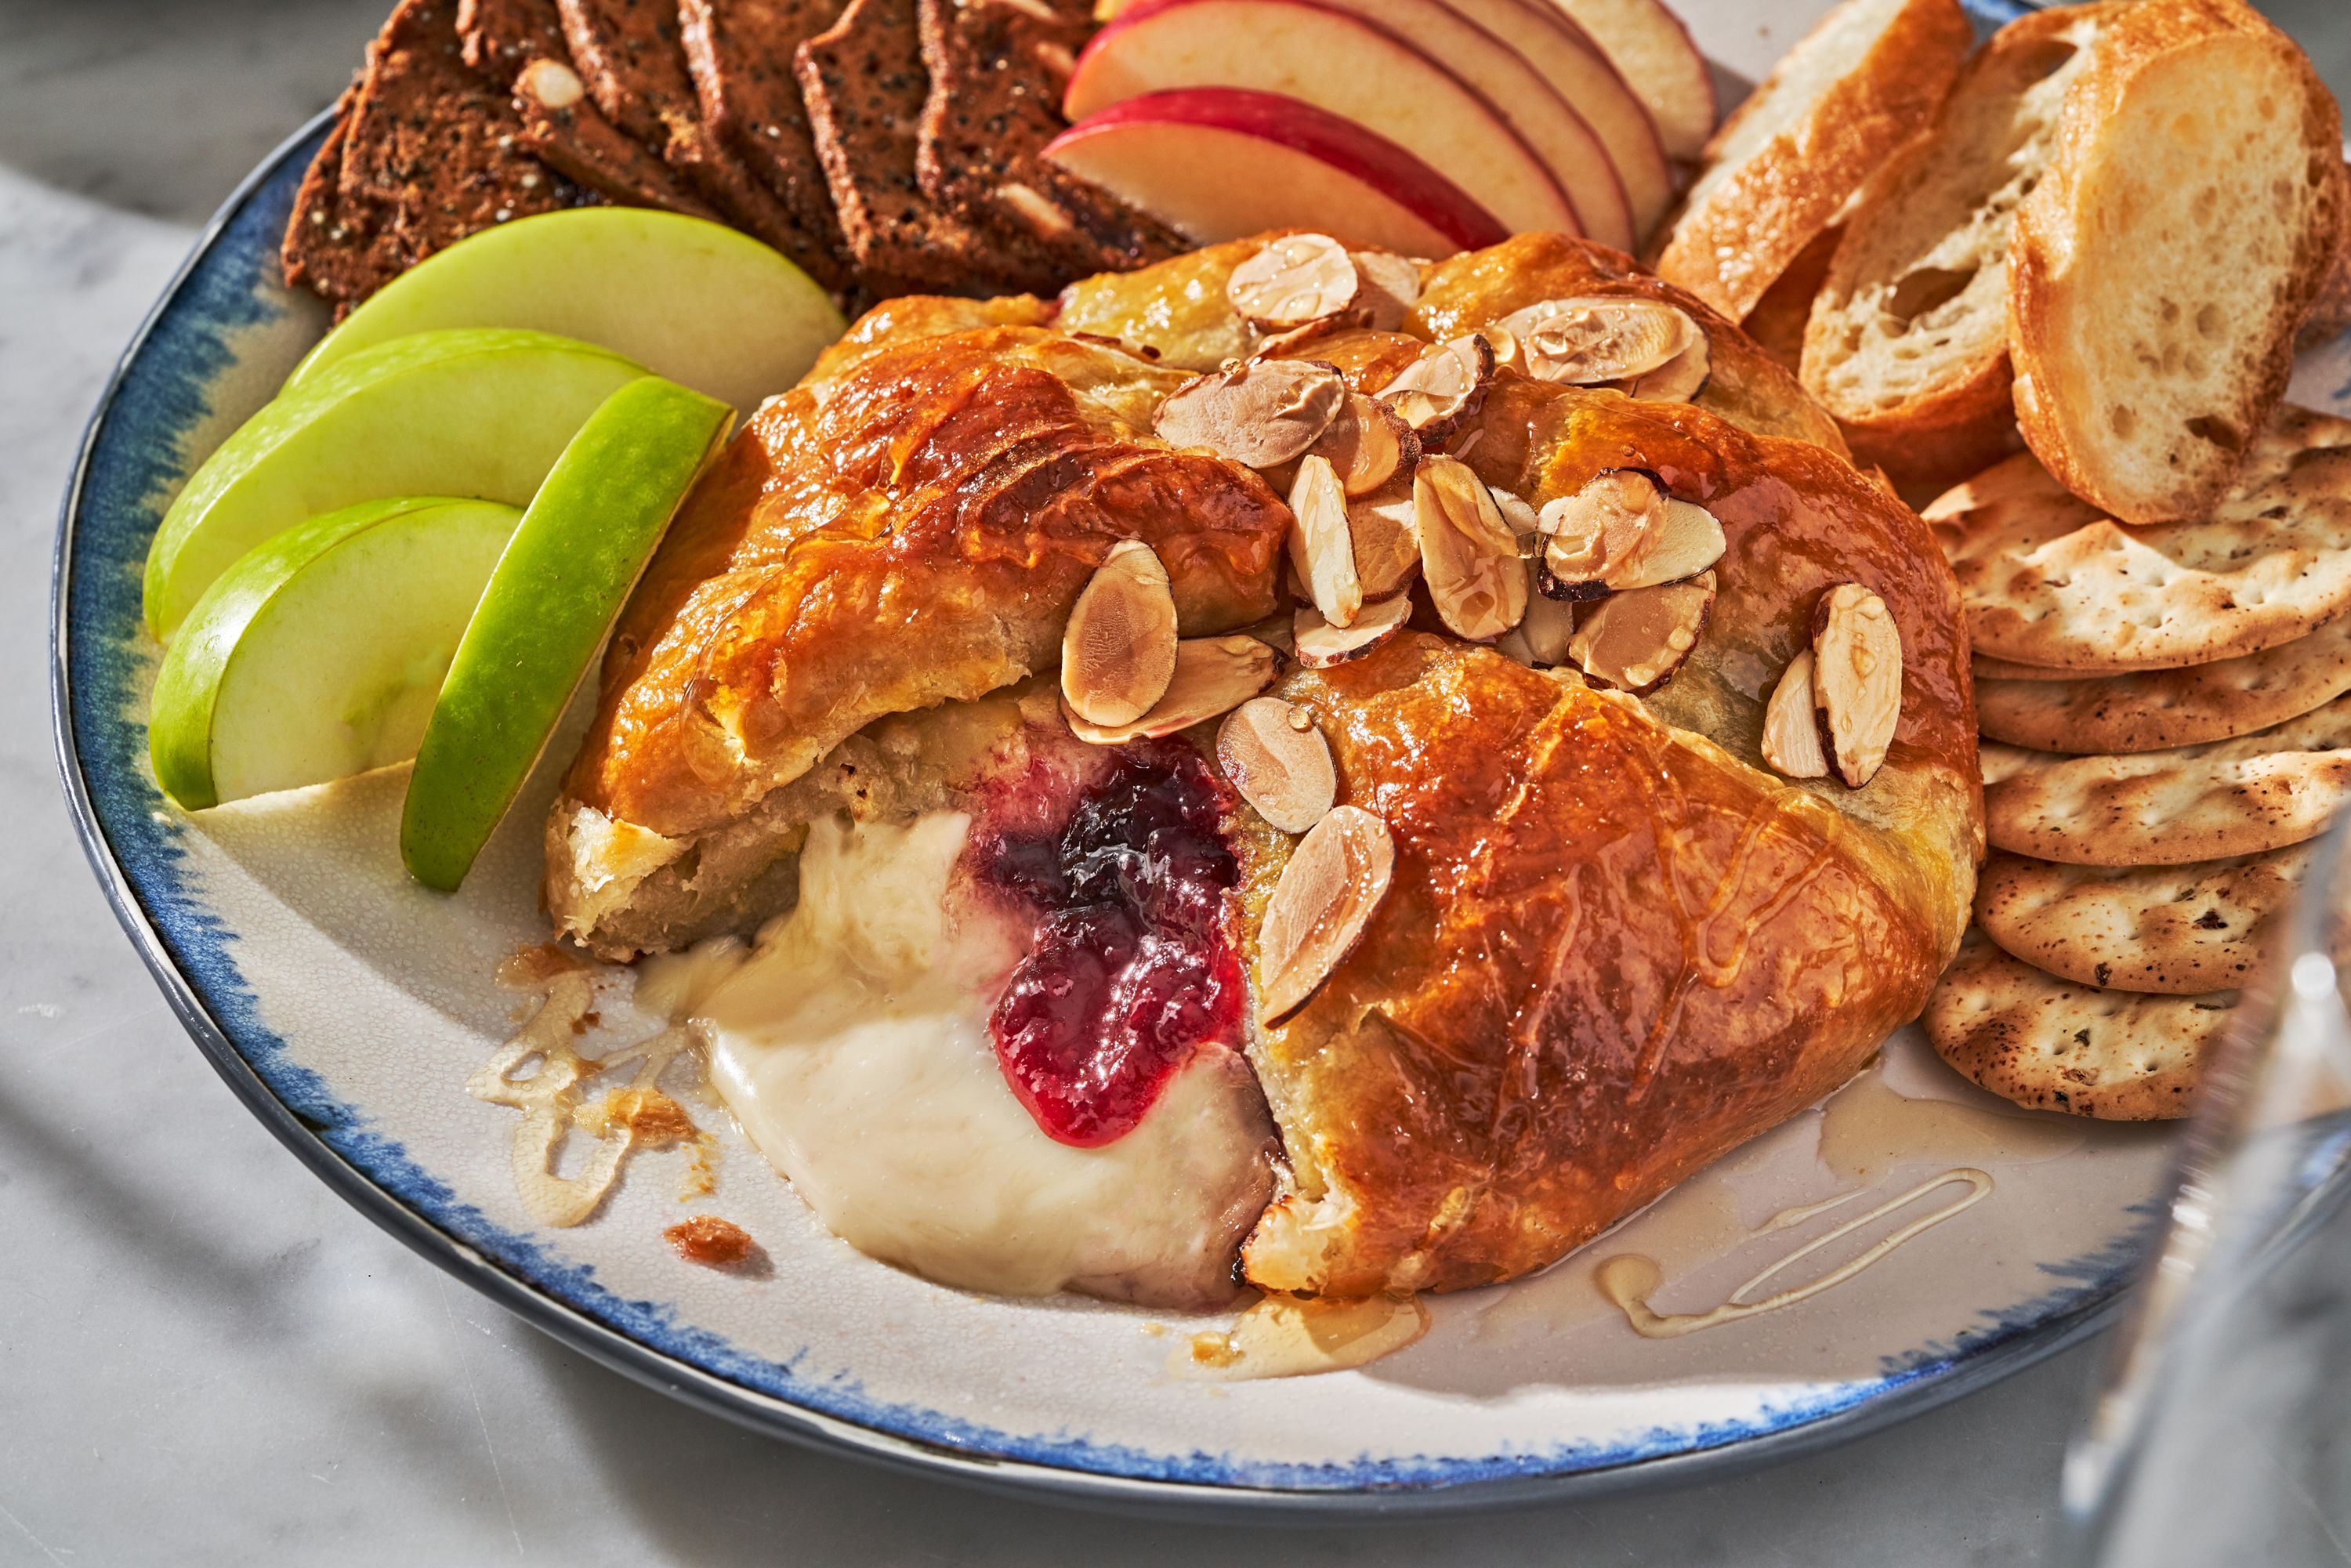 Baked Brie with Apples, Honey and Nuts - Del's cooking twist